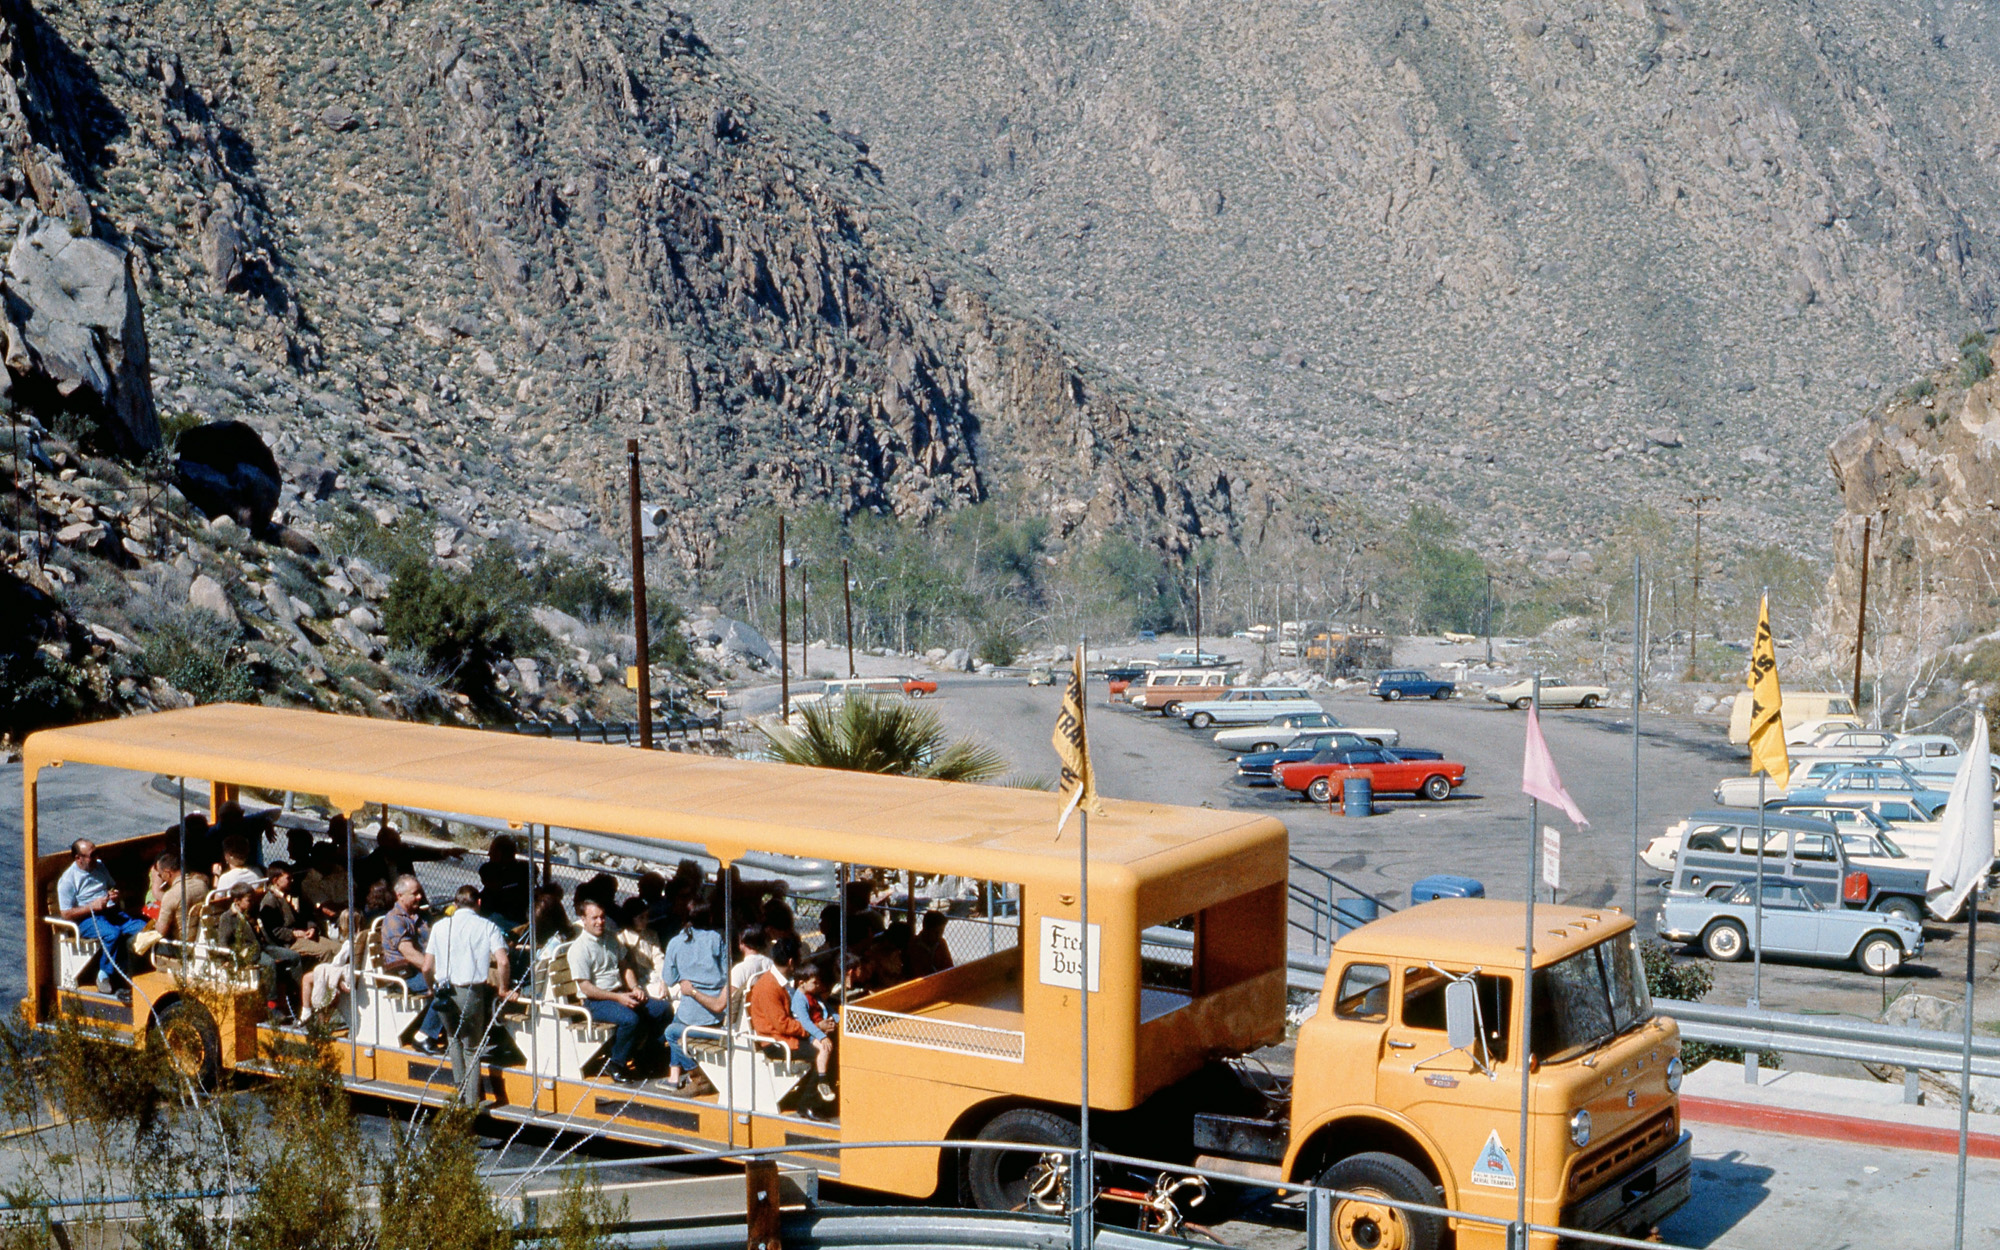 Palm Springs, California, March 1969. The tractor-trailer shuttle between the lower parking lot and aerial tram base entry. I wonder if this unique vehicle has survived. View full size.